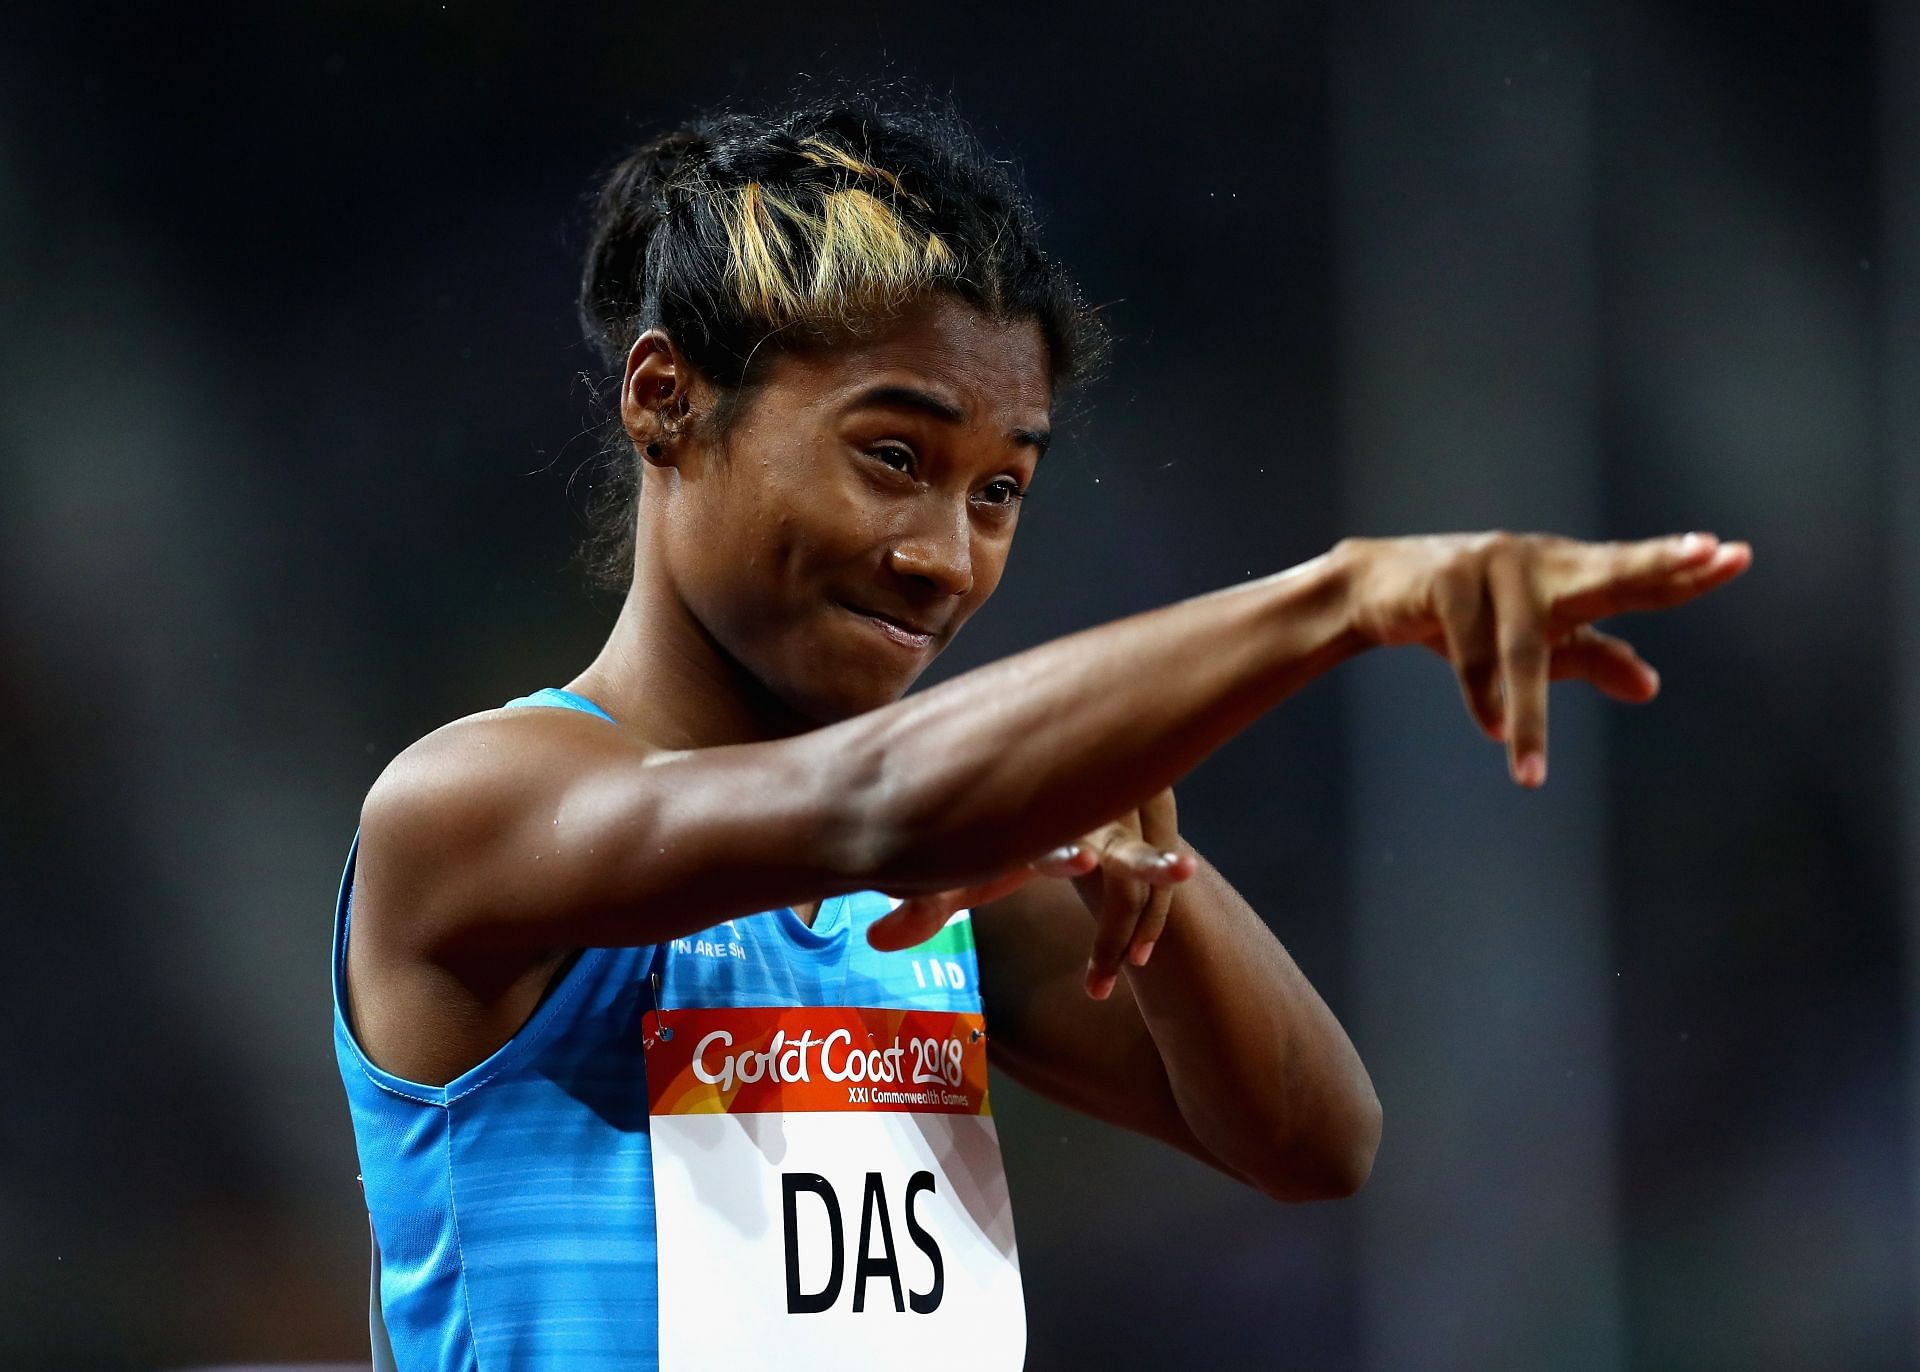 Hima Das is competing in the 100m category